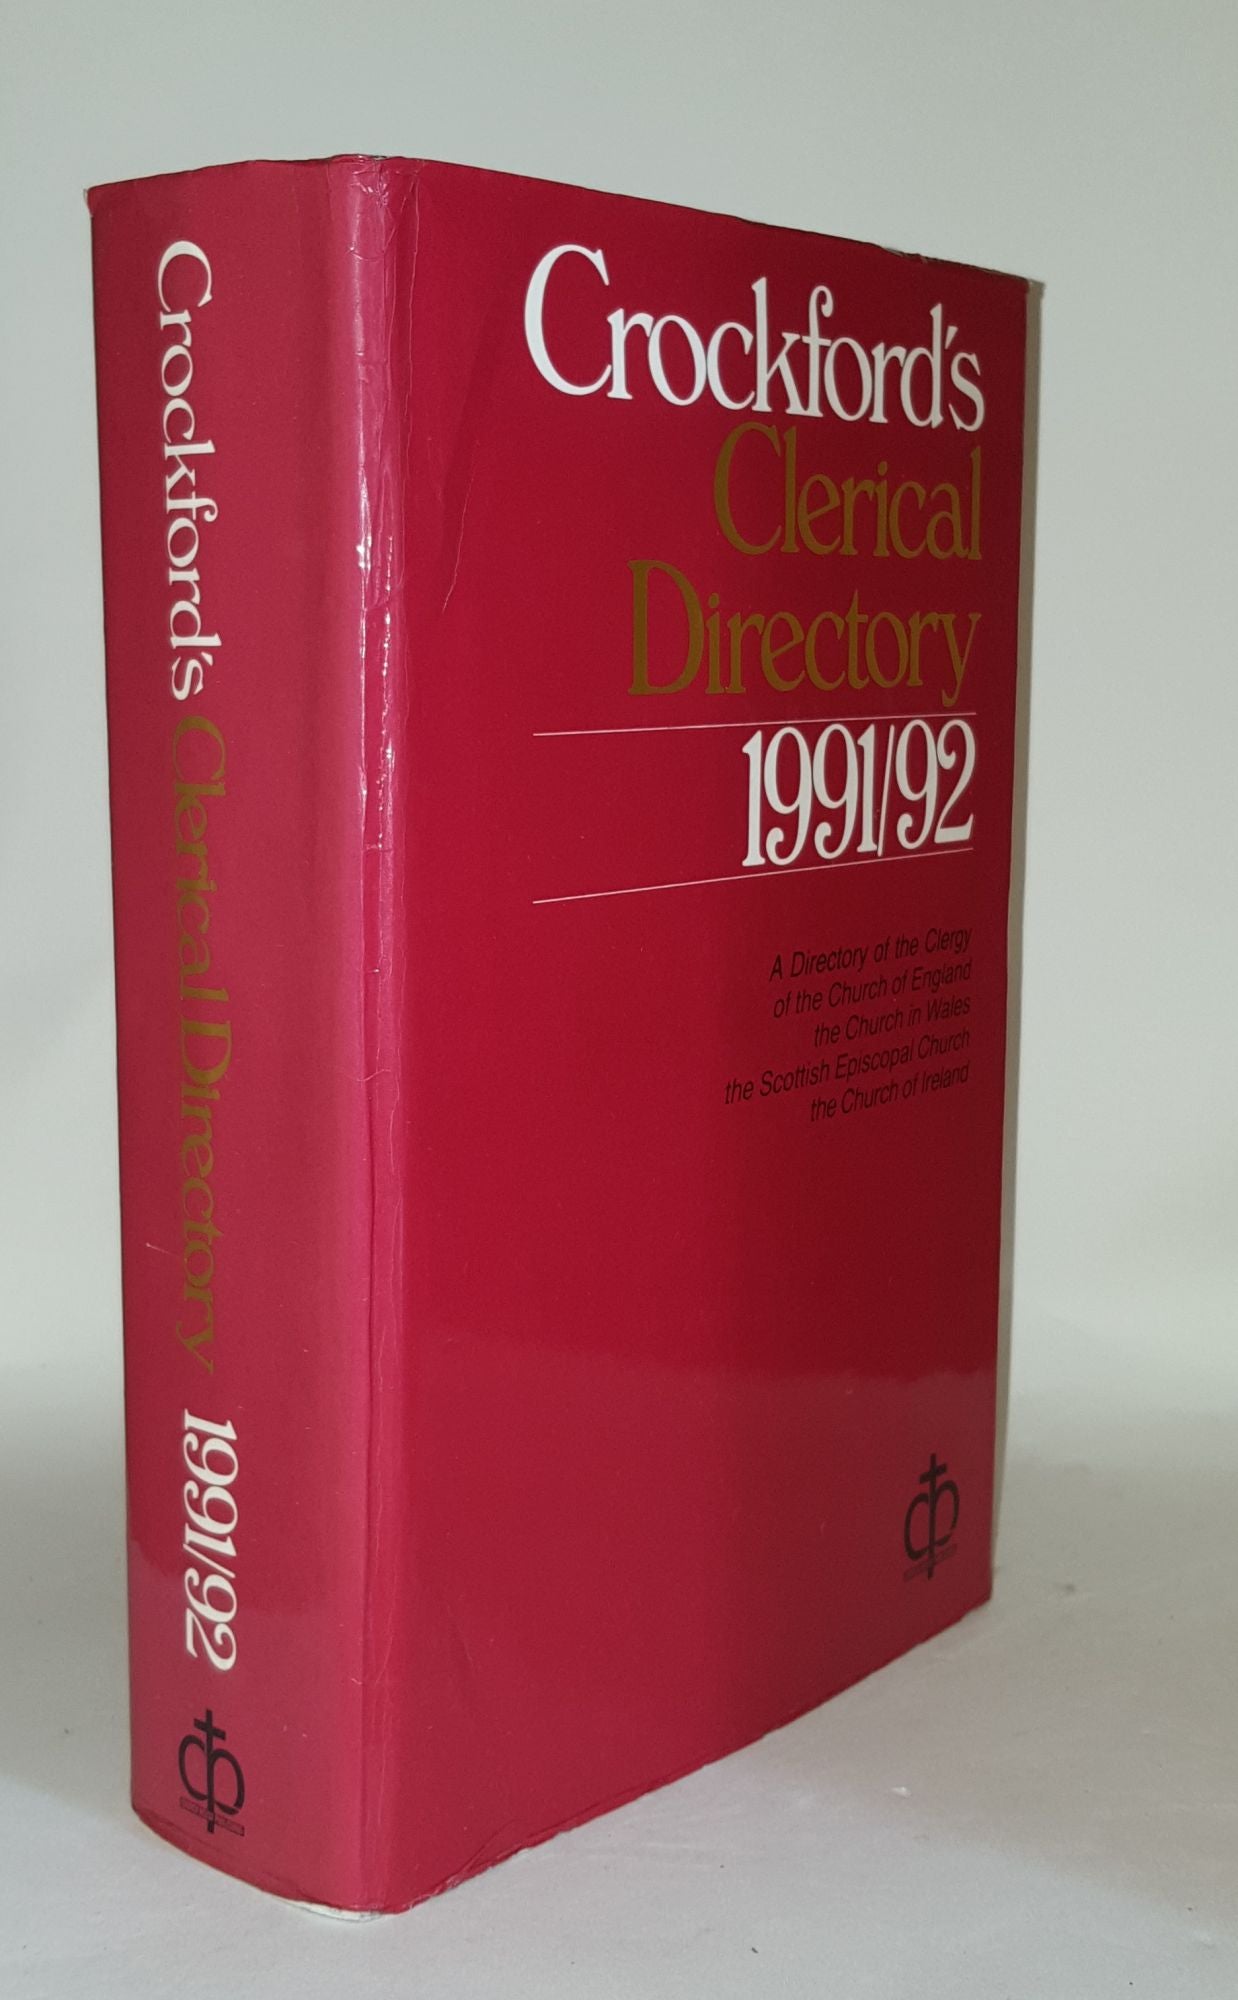 Anon - Crockford's Clerical Directory 1991-92